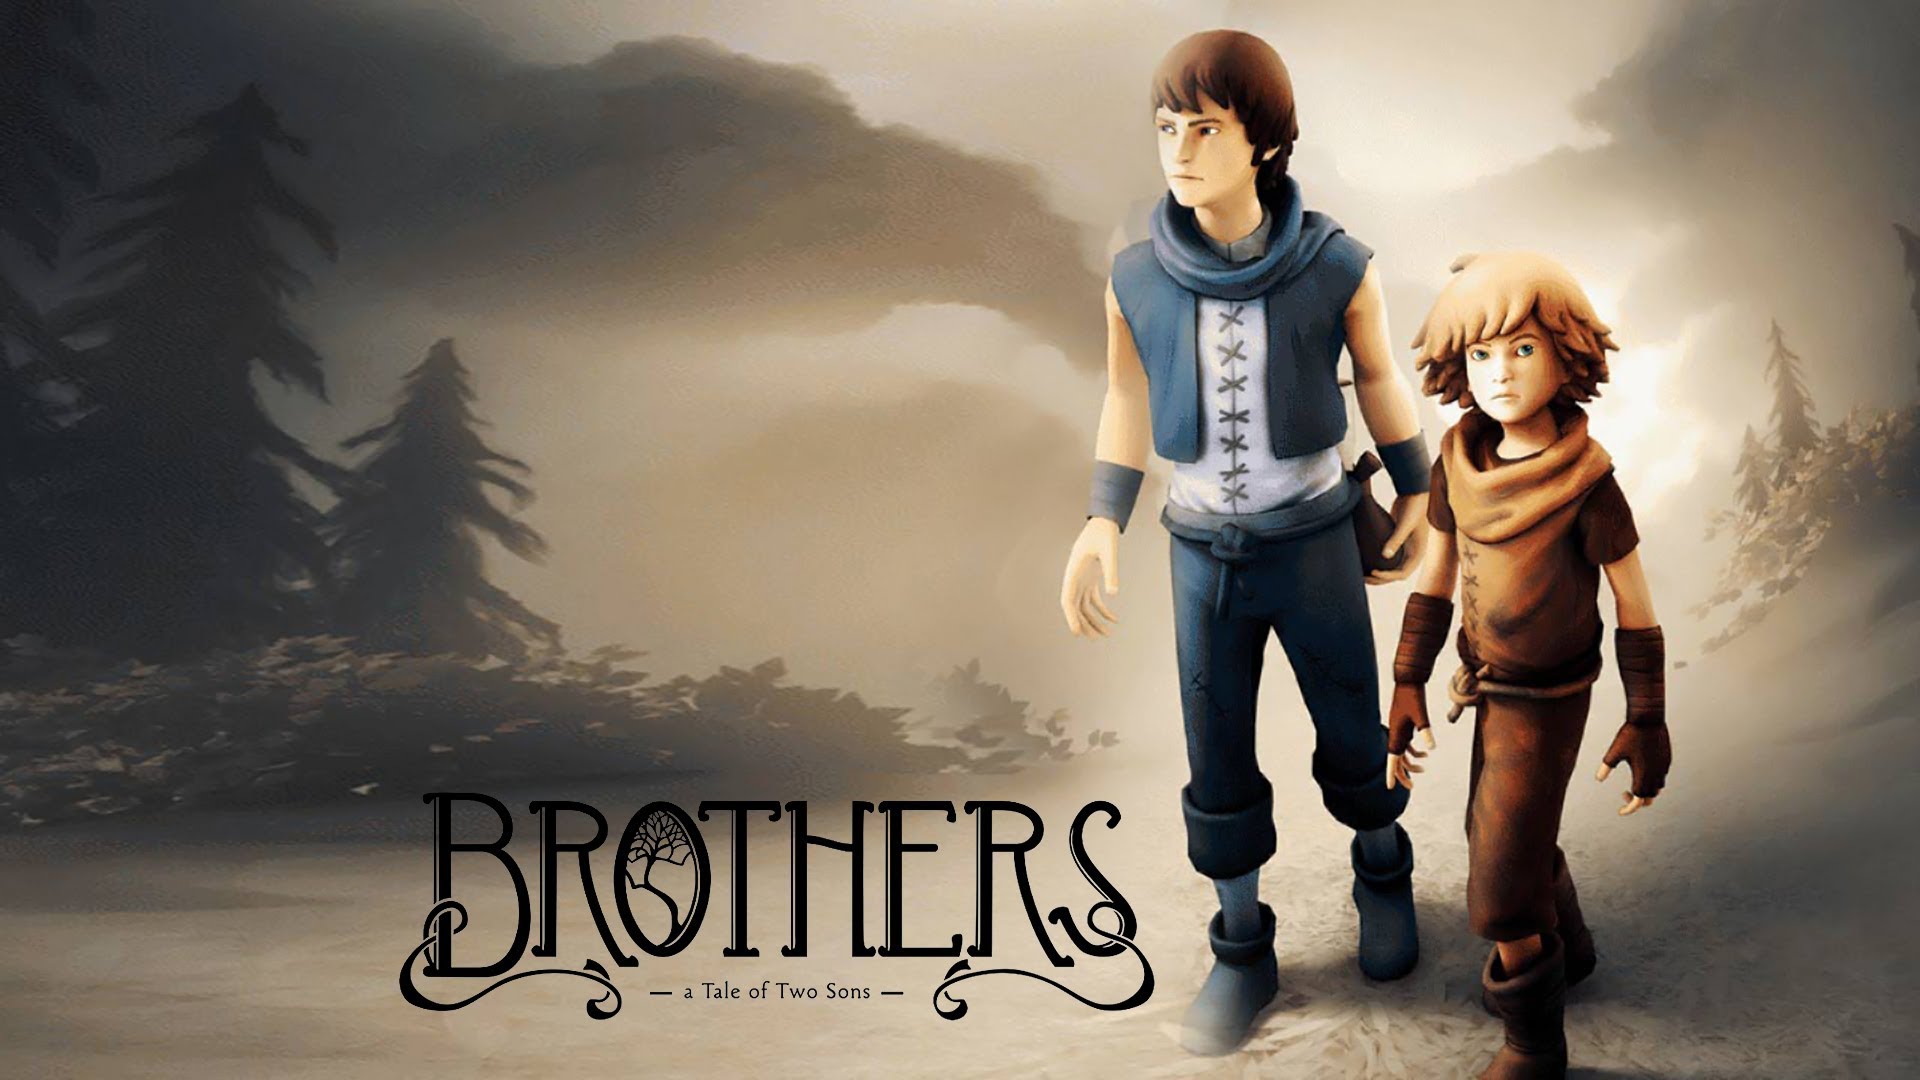 Child video game protagonists - Brothers: A Tale of Two Sons (Naia & Naiee)